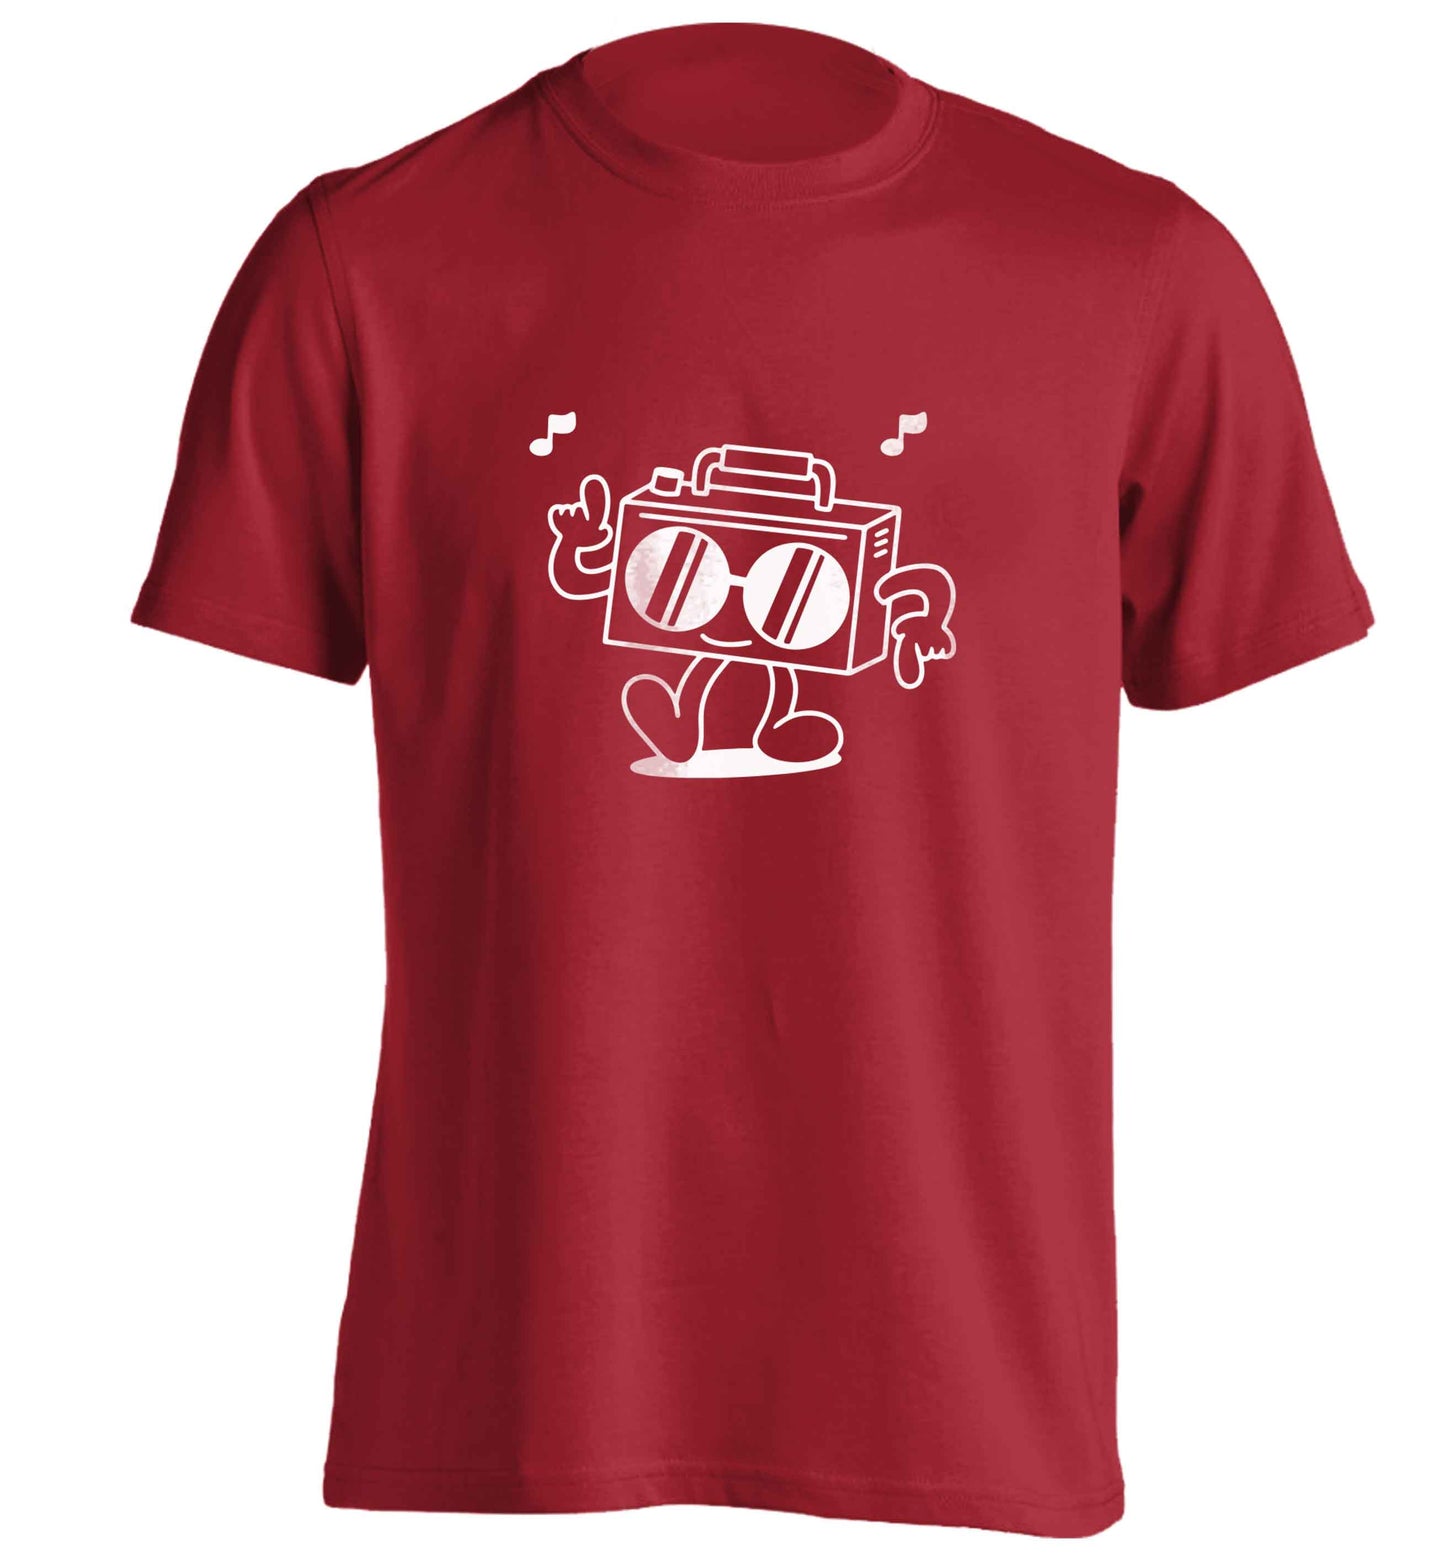 Boombox adults unisex red Tshirt 2XL